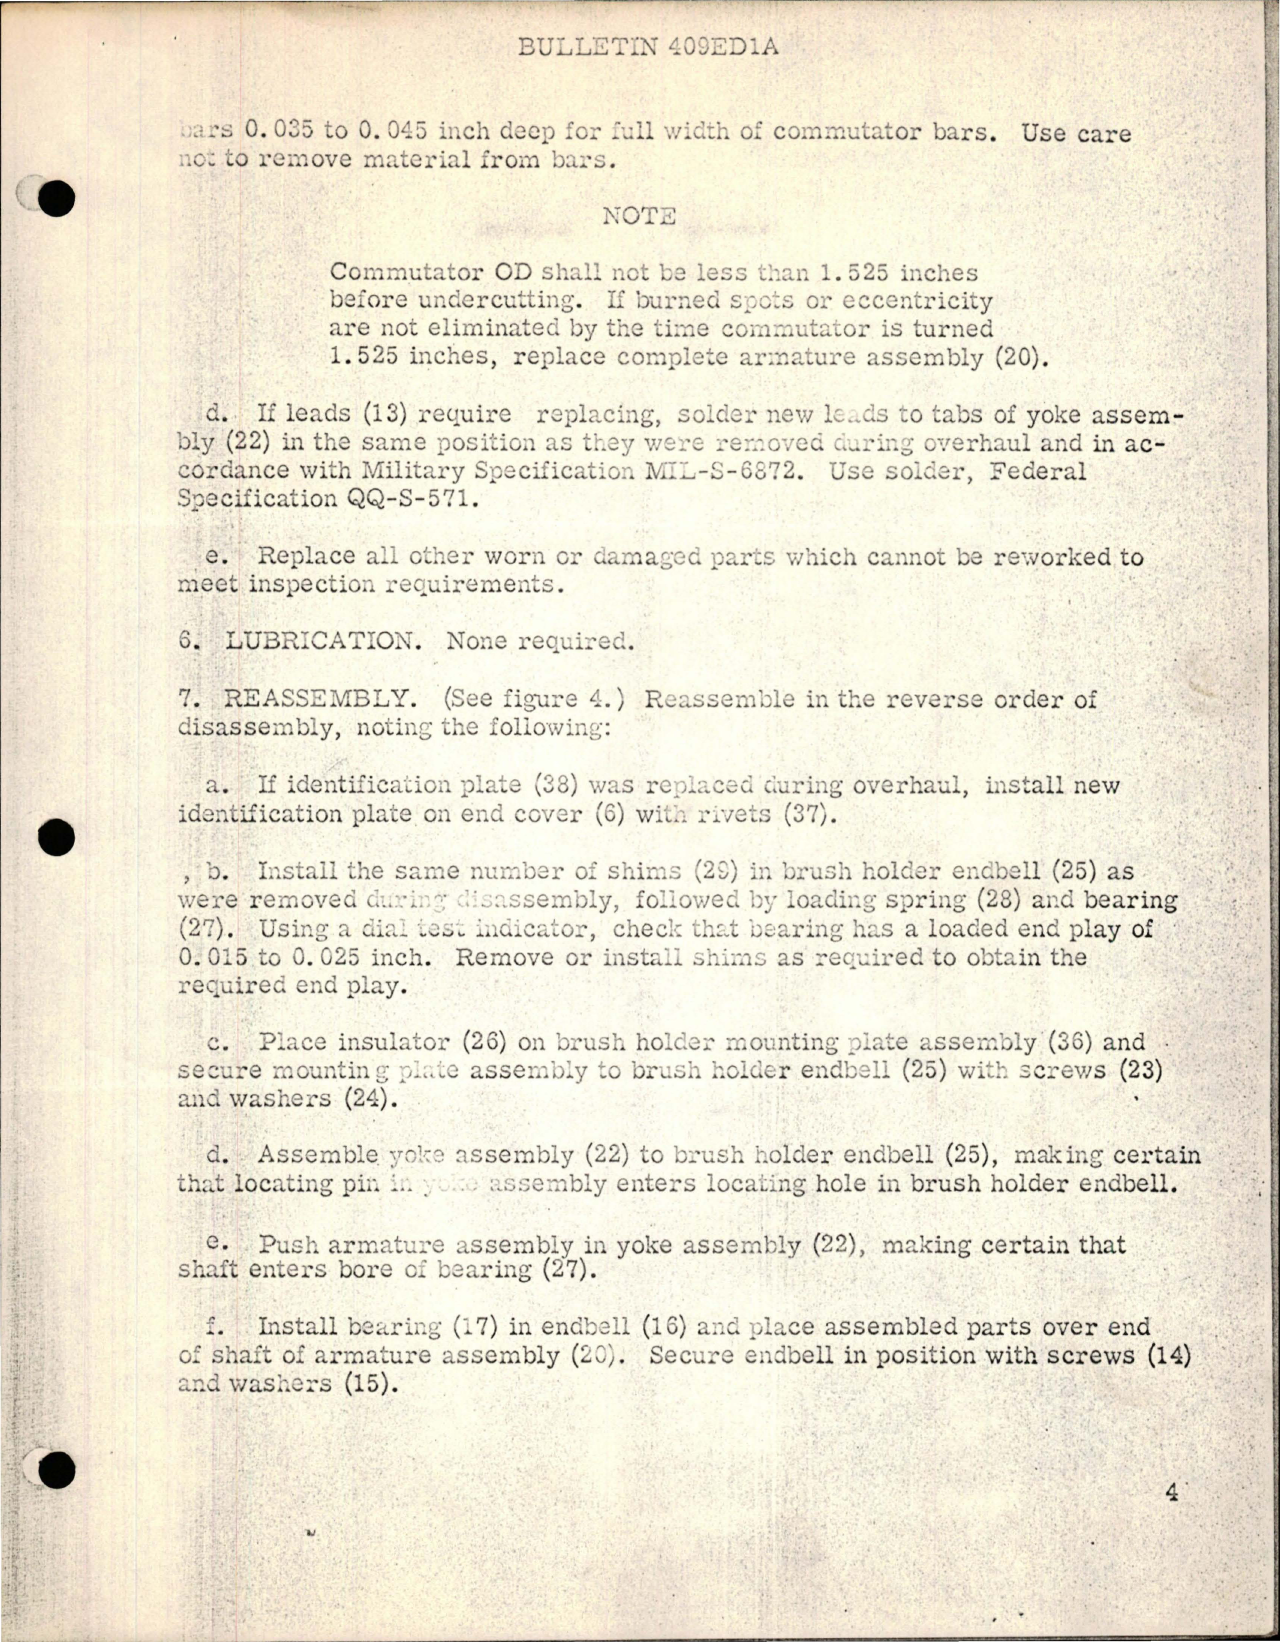 Sample page 5 from AirCorps Library document: Overhaul Instructions with Parts Breakdown for DC Motor - Part 409ED1A